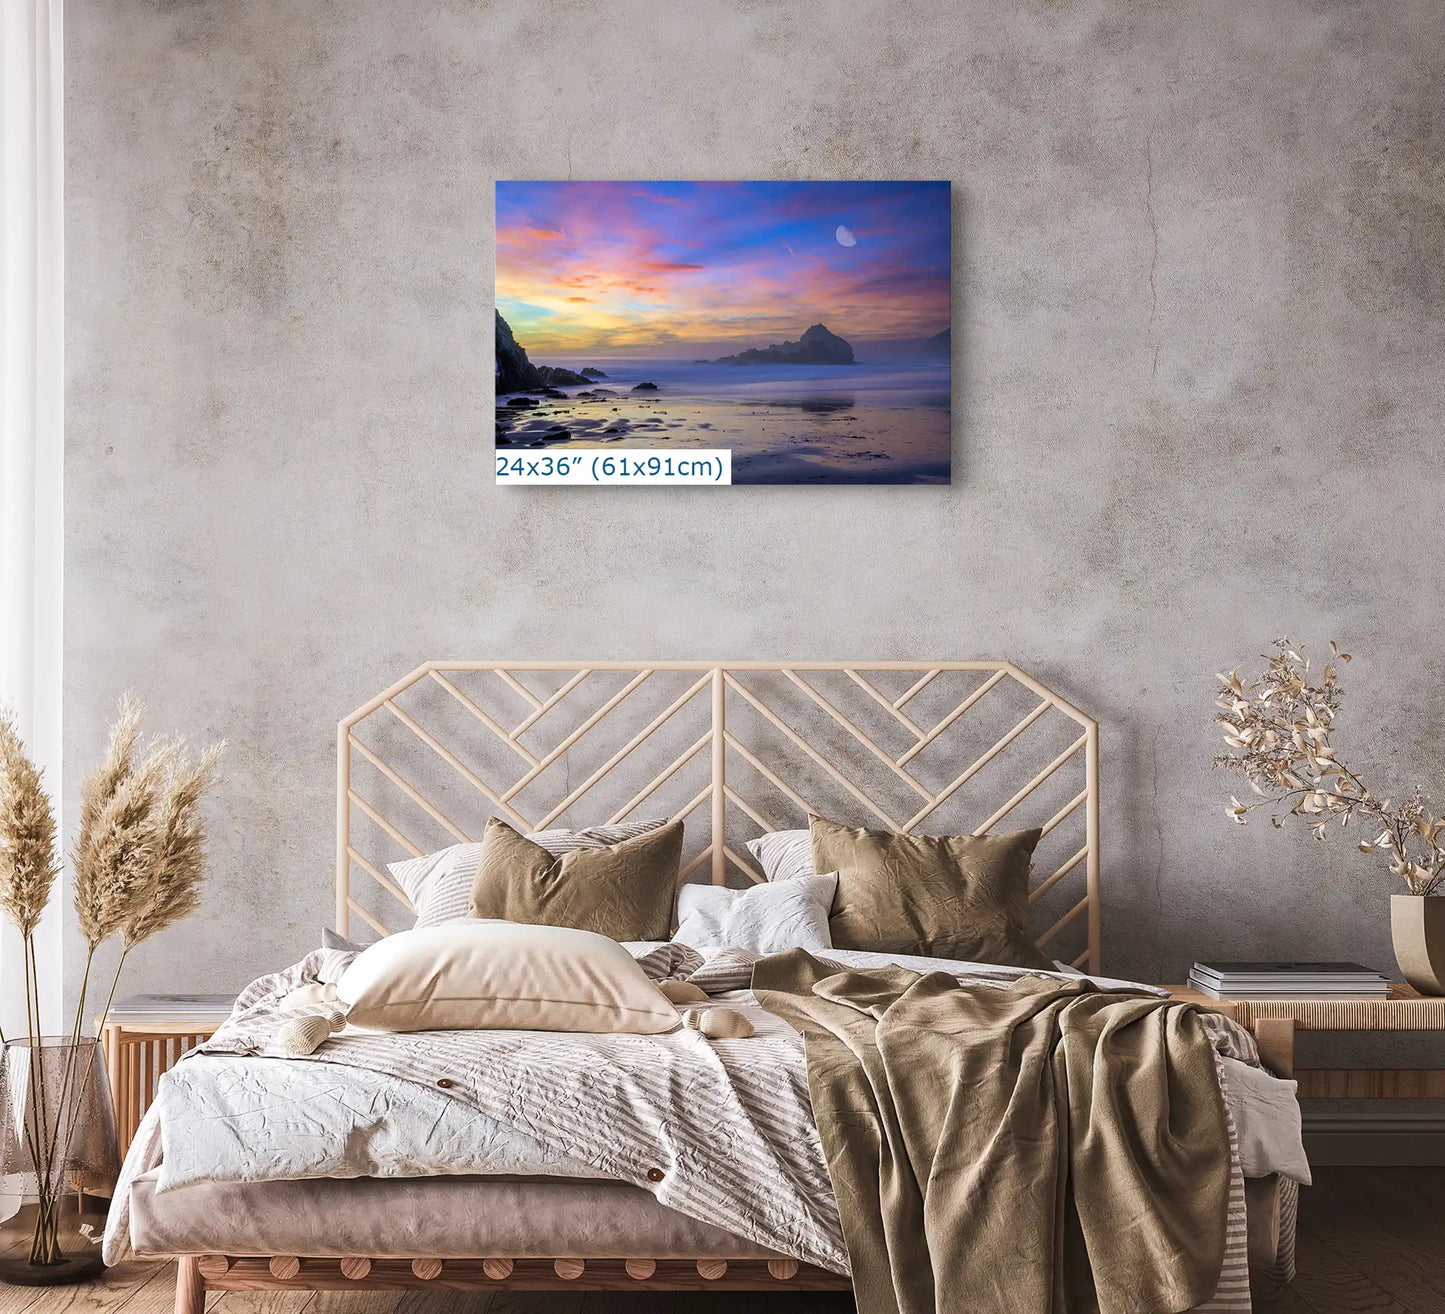 A 24x36-inch Big Sur sunset canvas creates a peaceful atmosphere in a modern bedroom, with the moon's rise over purple sands.